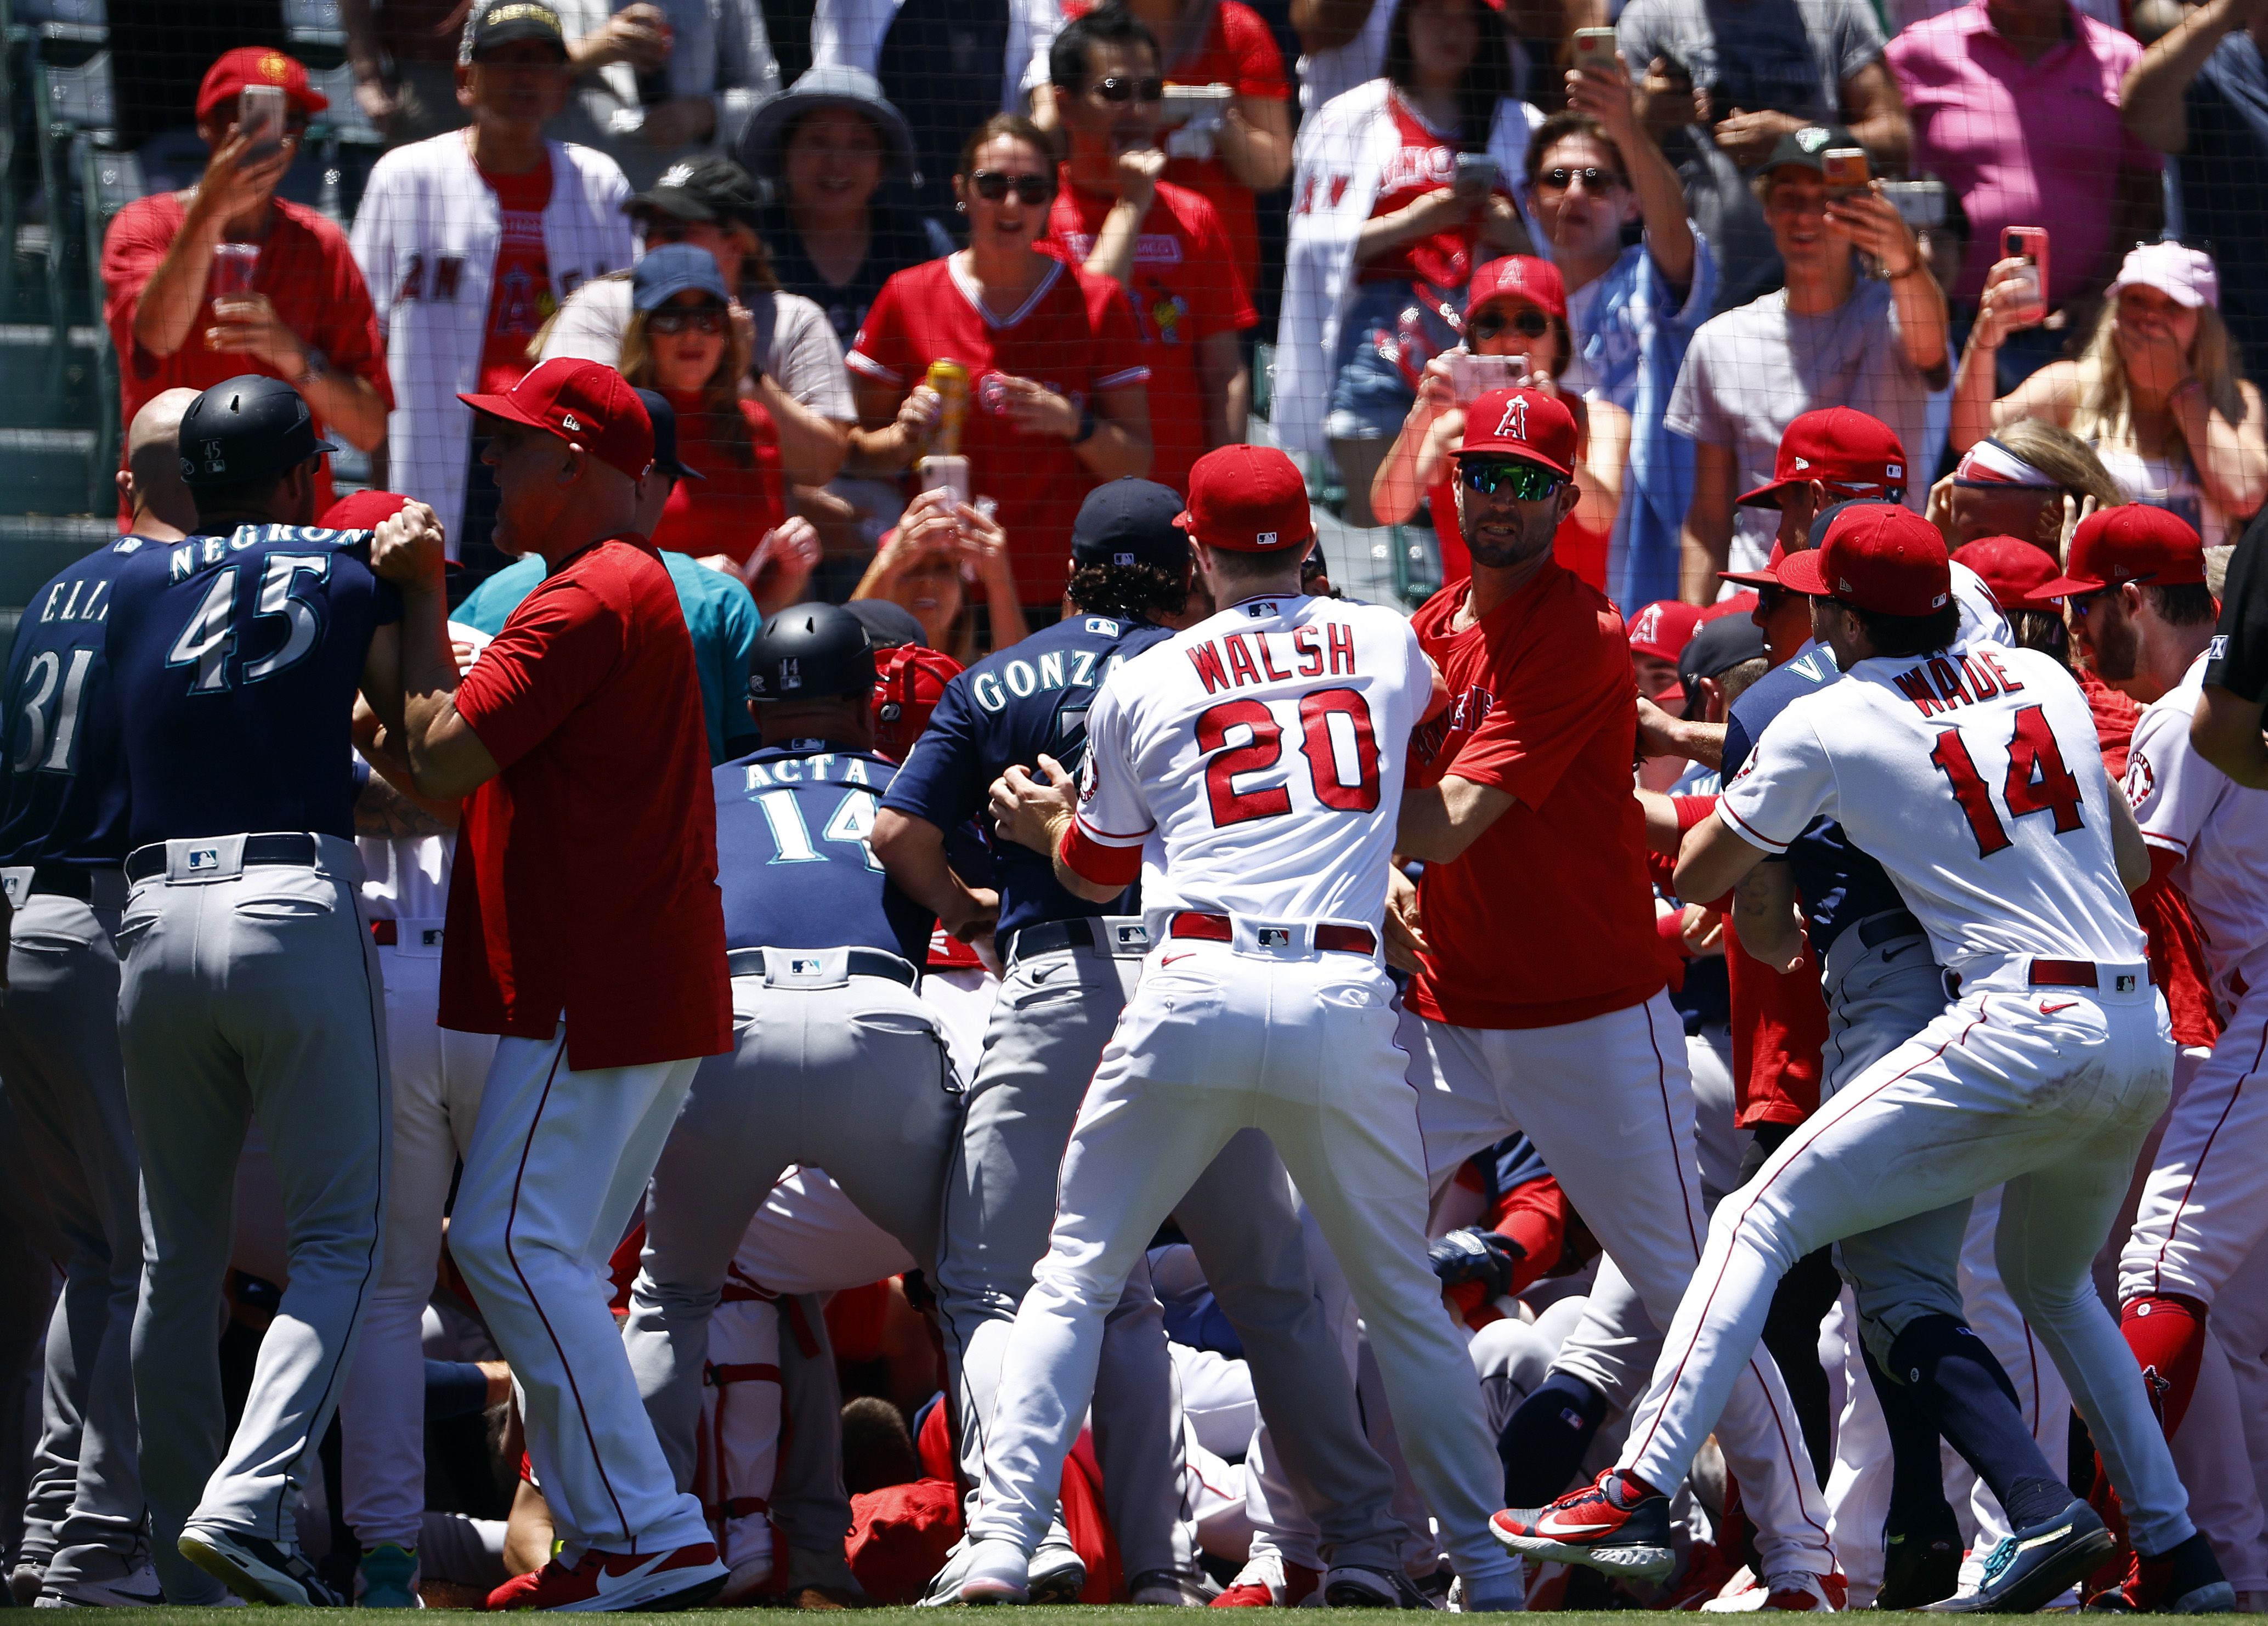 MLB: 12 suspended after mass brawl between Mariners and Angels